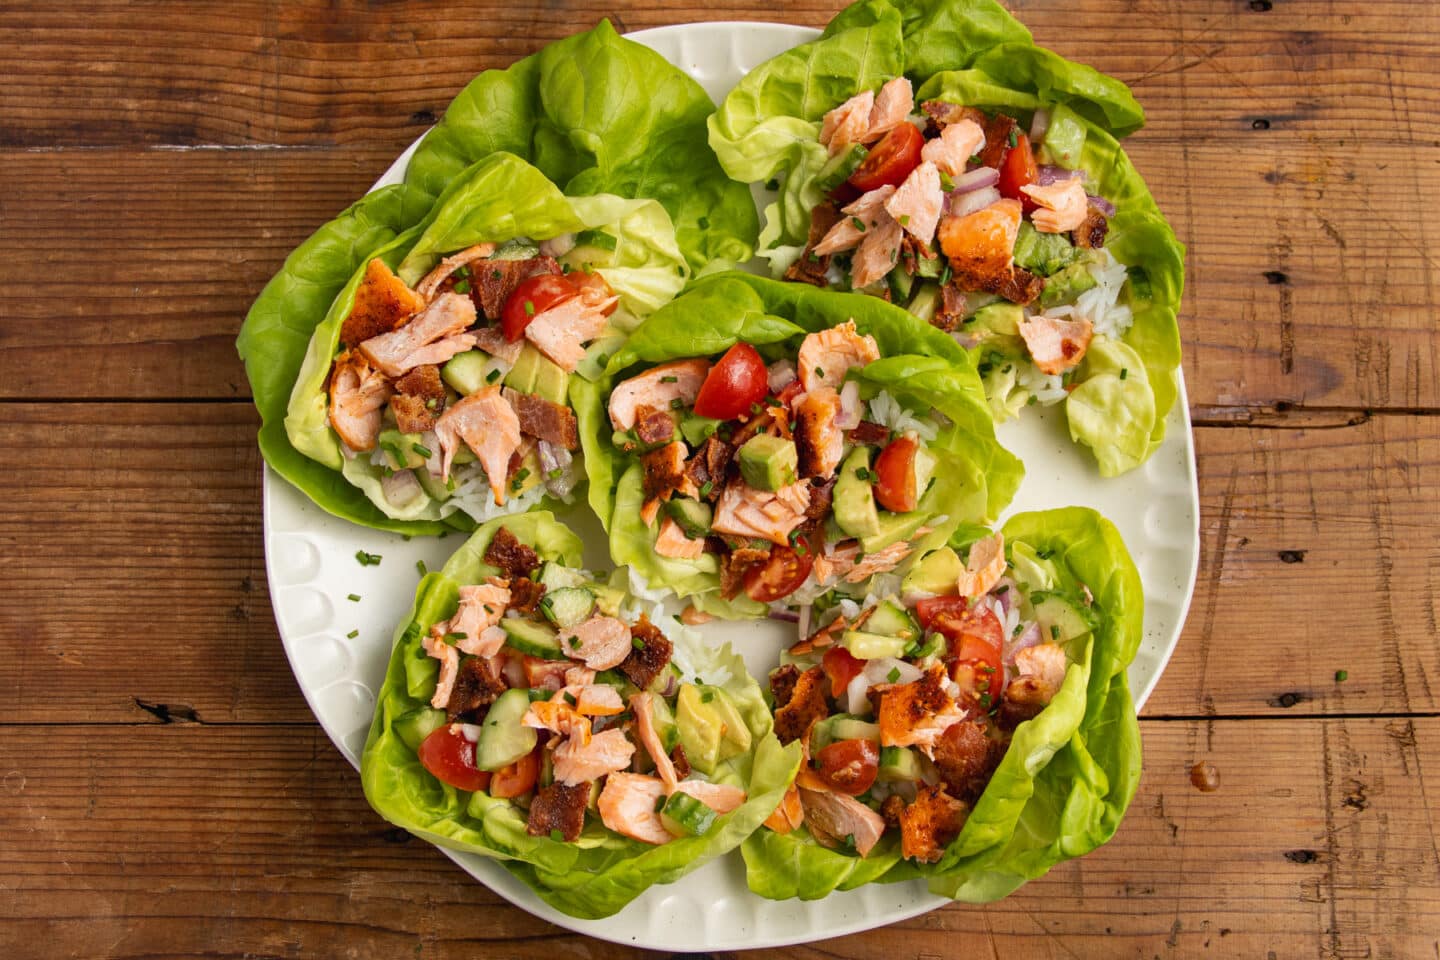 This is a picture of the lettuce cup with bacon and salmon added.